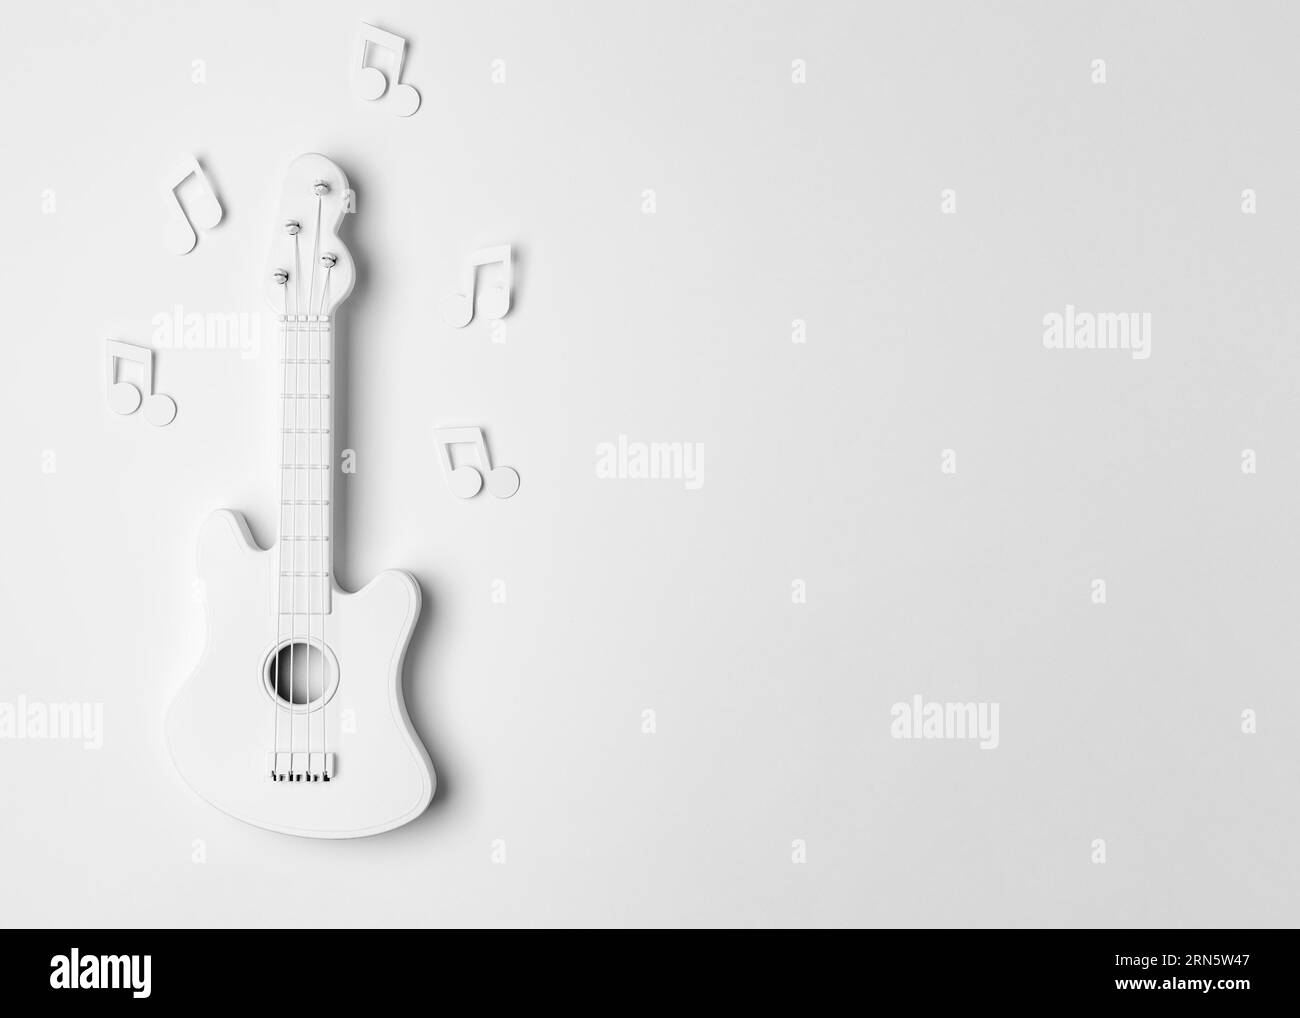 Top view white guitar arrangement with copy space Stock Photo